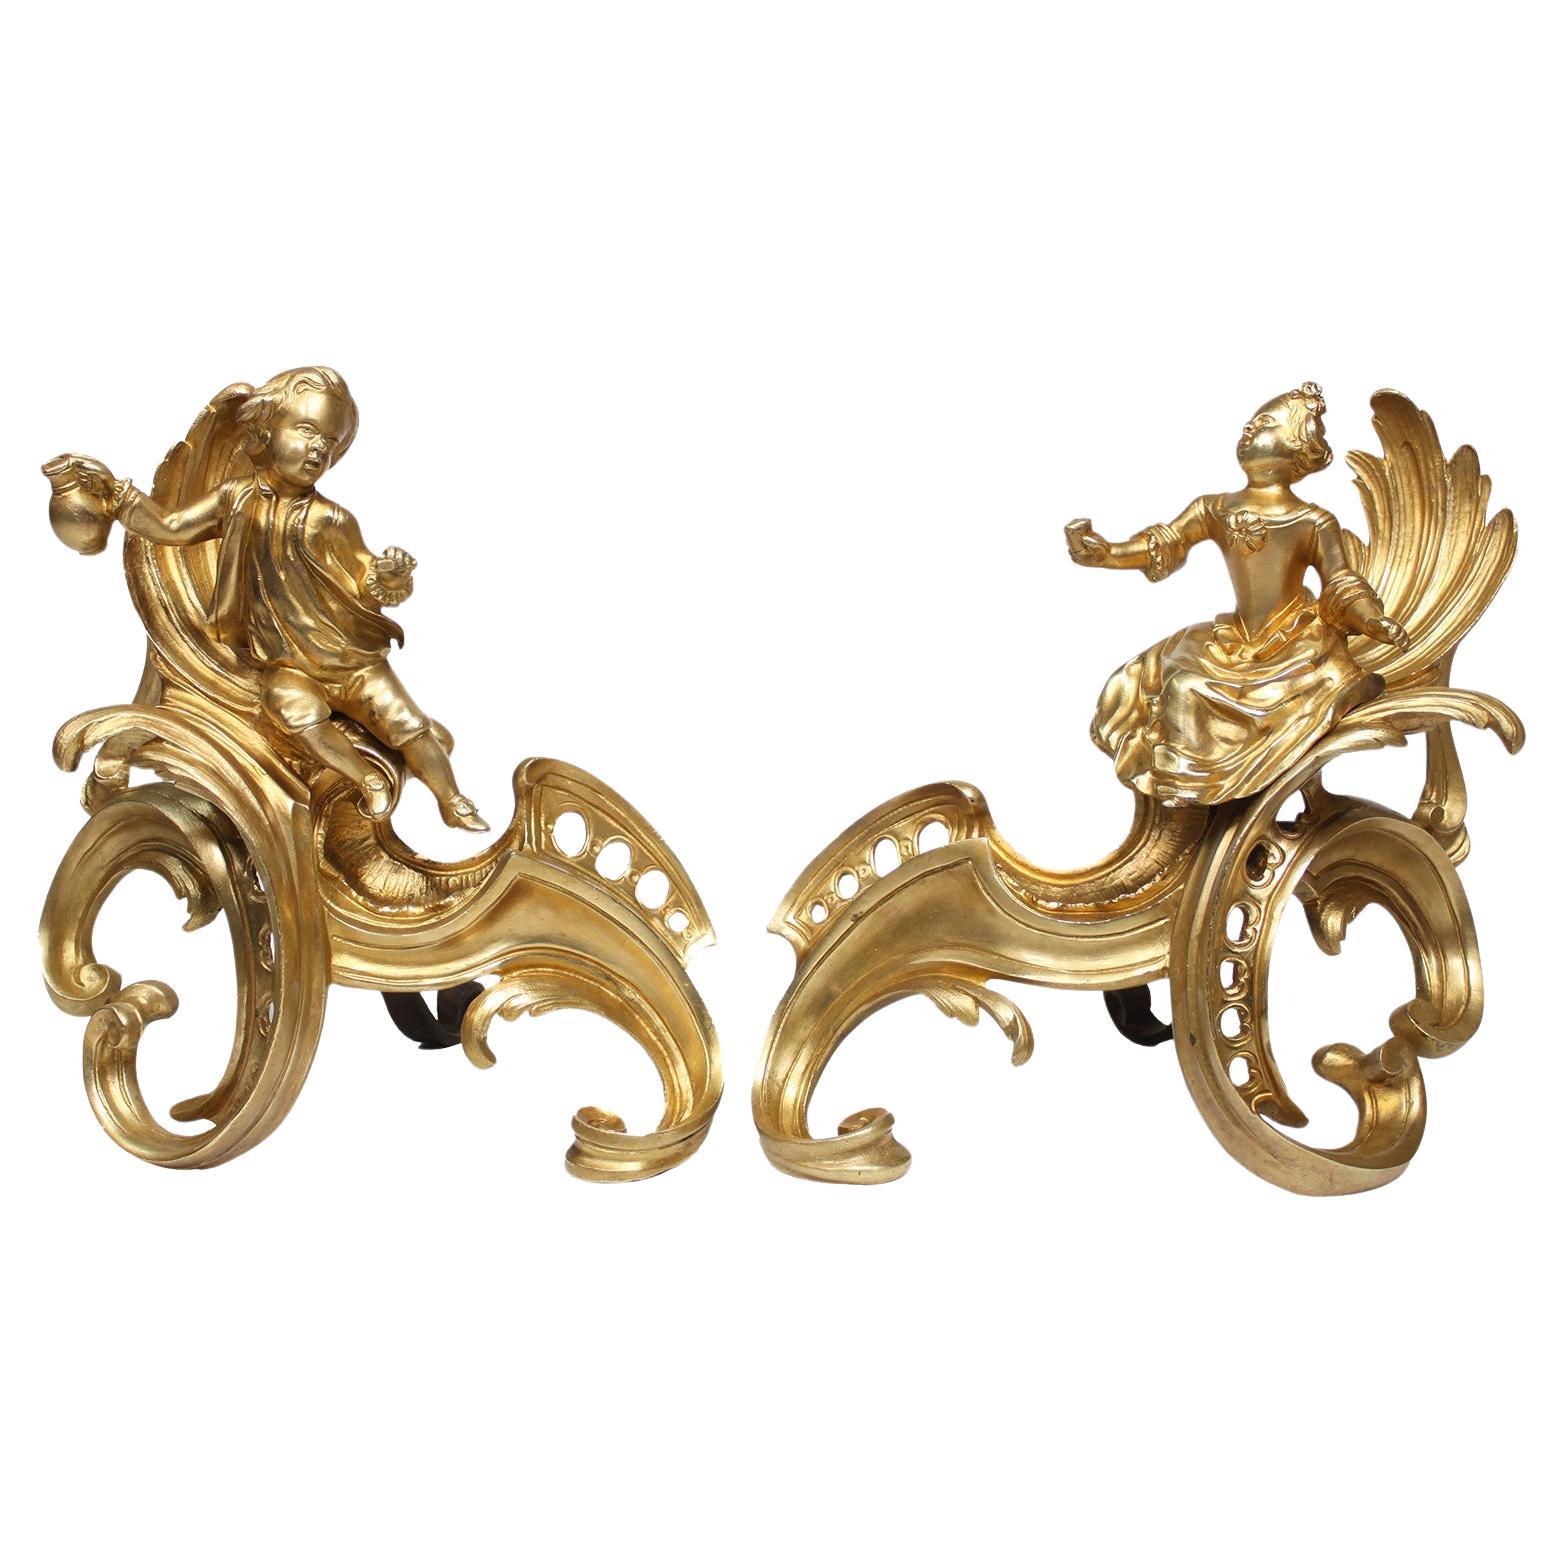 Pair of French Early 19th Century Louis XV Style Gilt Bronze Andirons Chenets